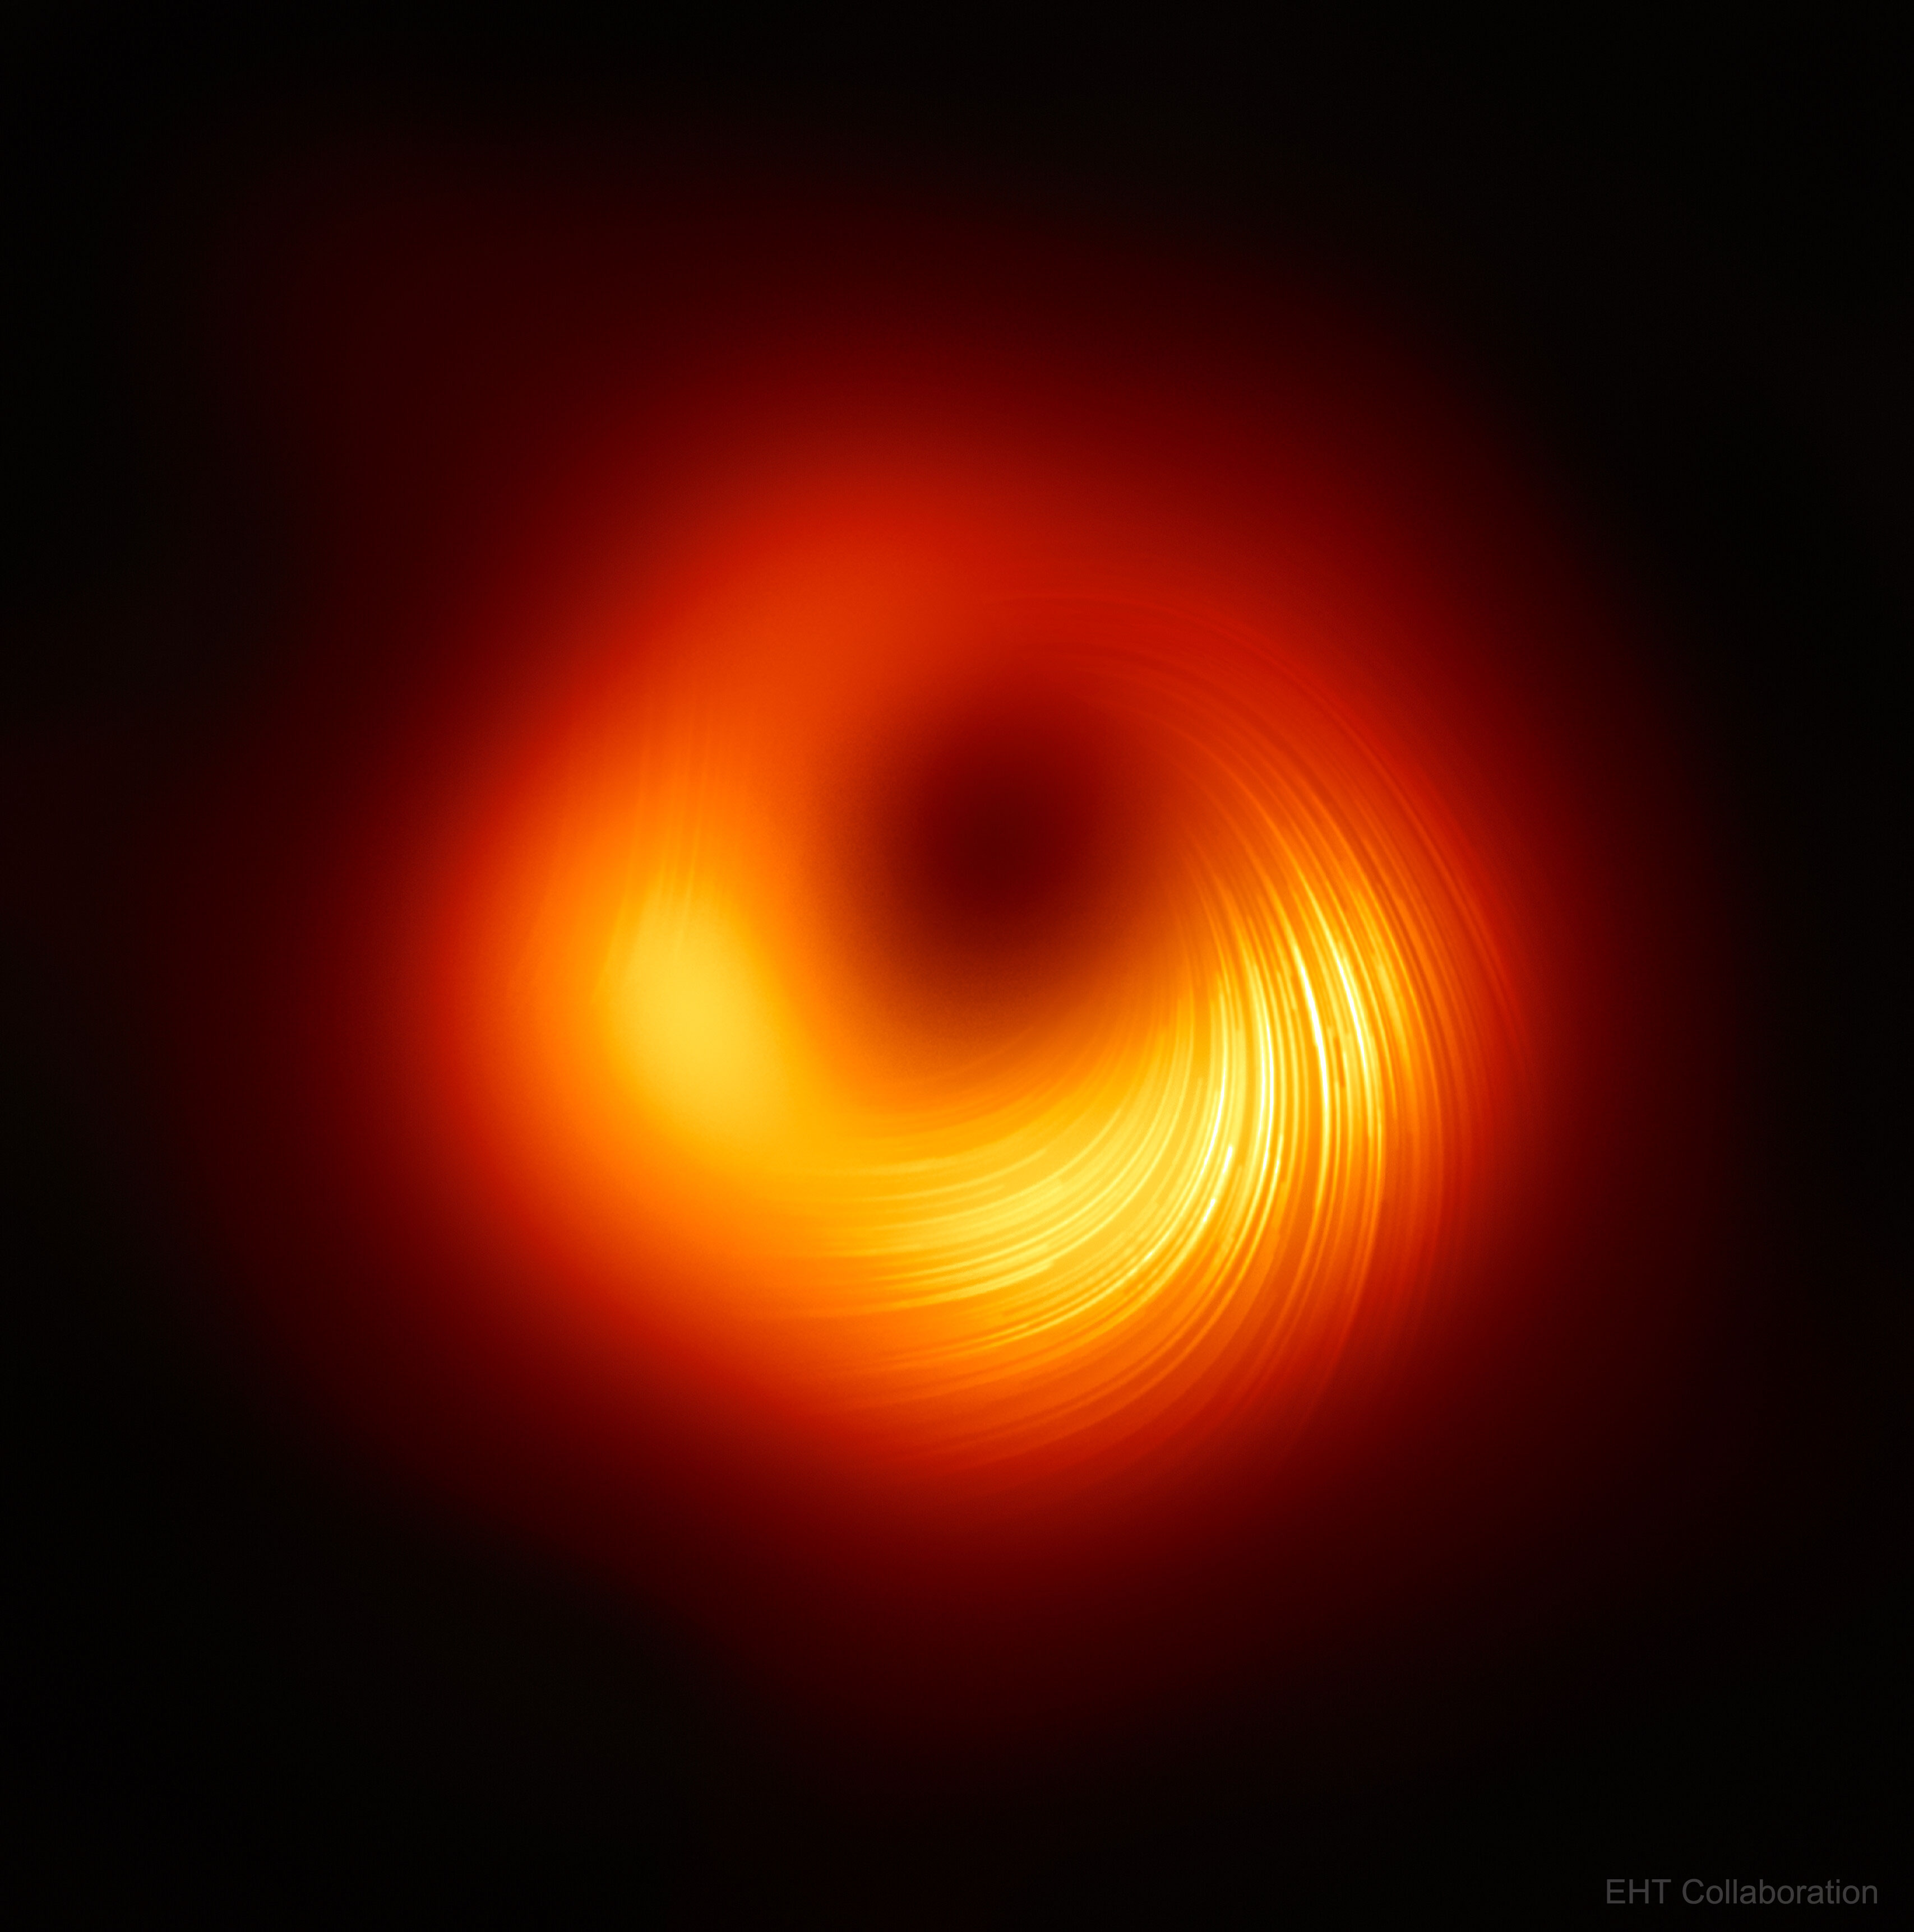 light going into a black hole